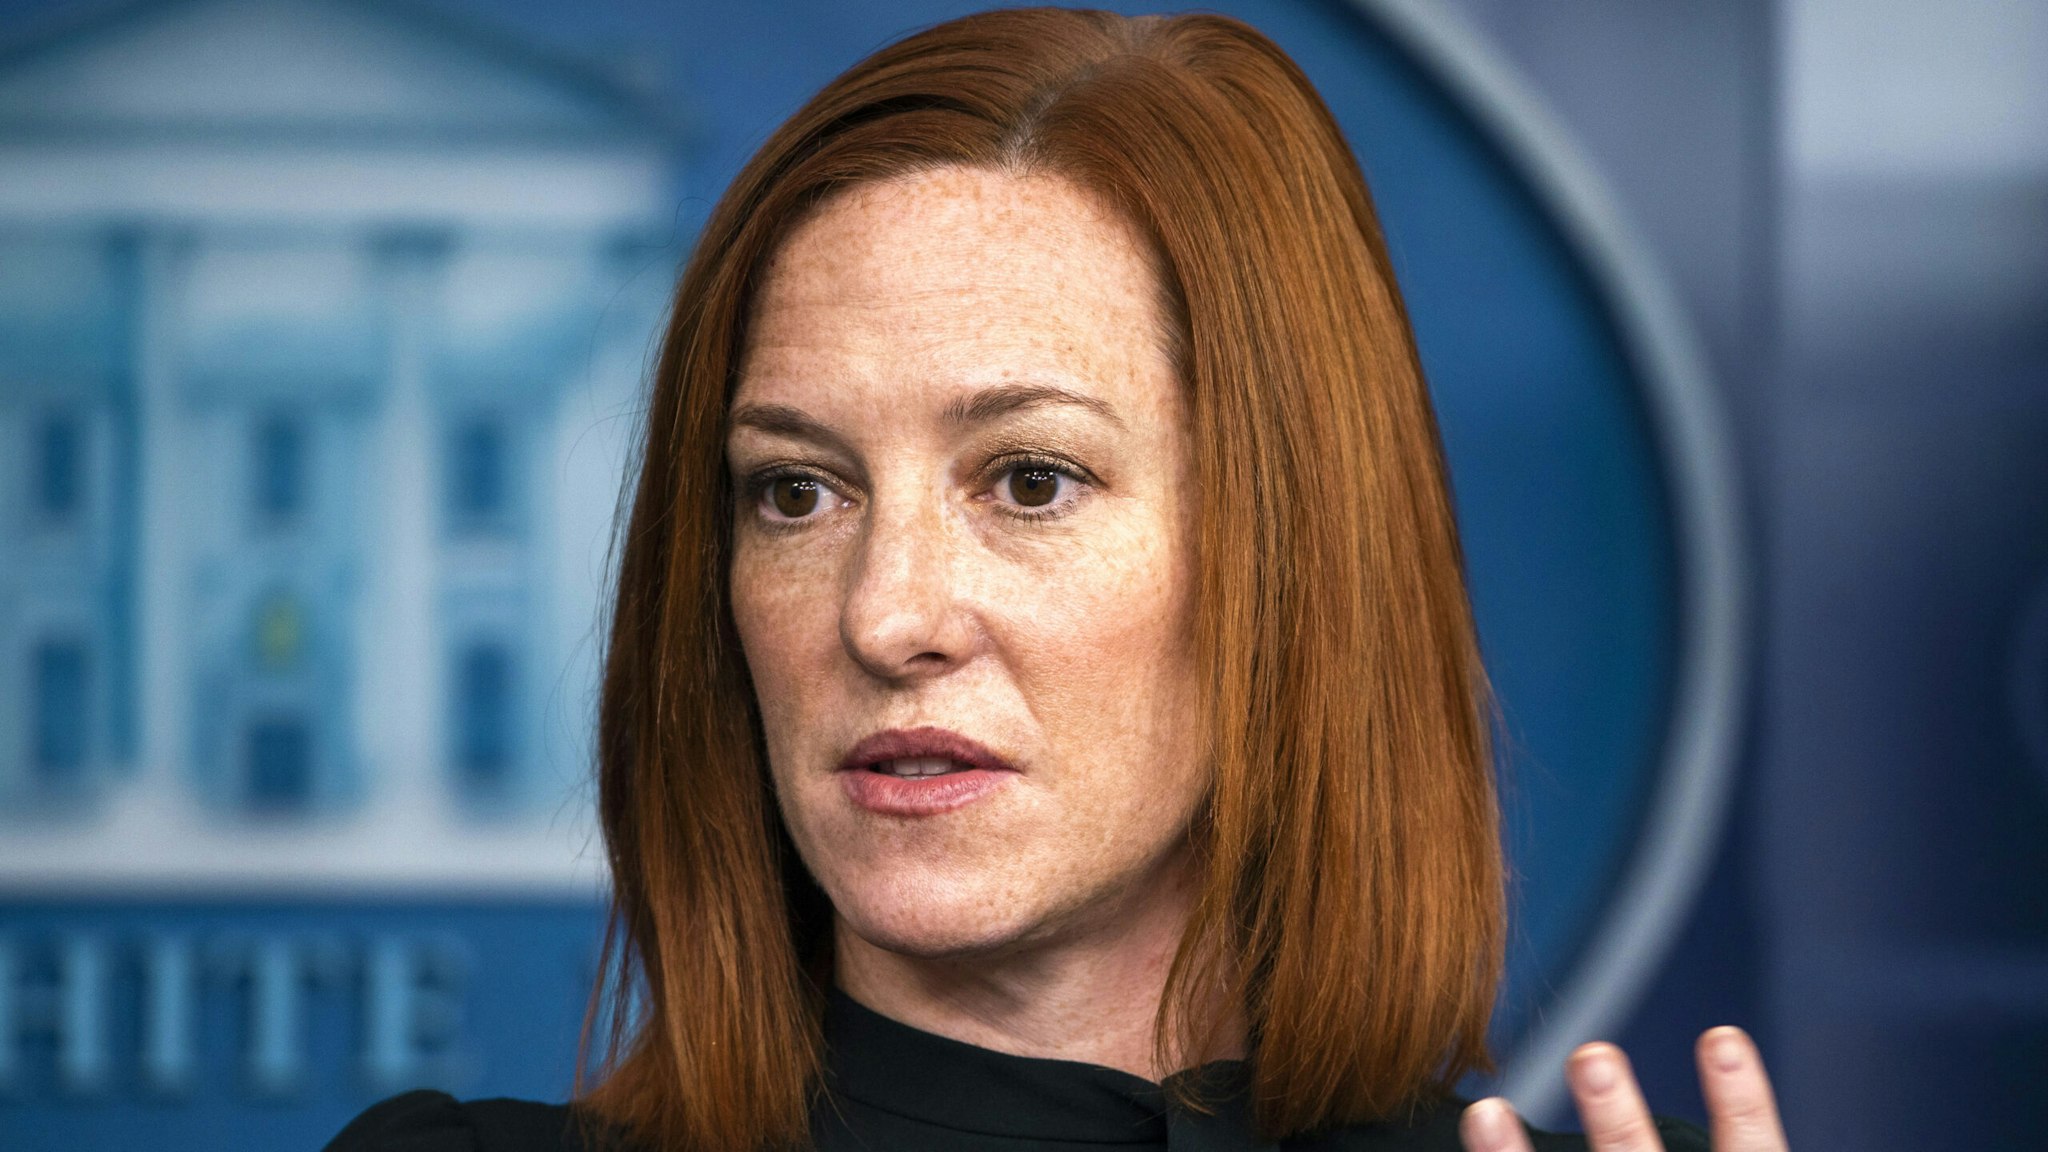 Jen Psaki, White House press secretary, speaks during a news conference in the James S. Brady Press Briefing Room at the White House in Washington, D.C., U.S., on Thursday, Feb. 4, 2021. President Joe Biden told House Democrats on Wednesday that while he was open to tightening the eligibility for his proposed $1,400 stimulus checks, any move to cut the payments' base amount would mean starting his presidency with a broken promise.